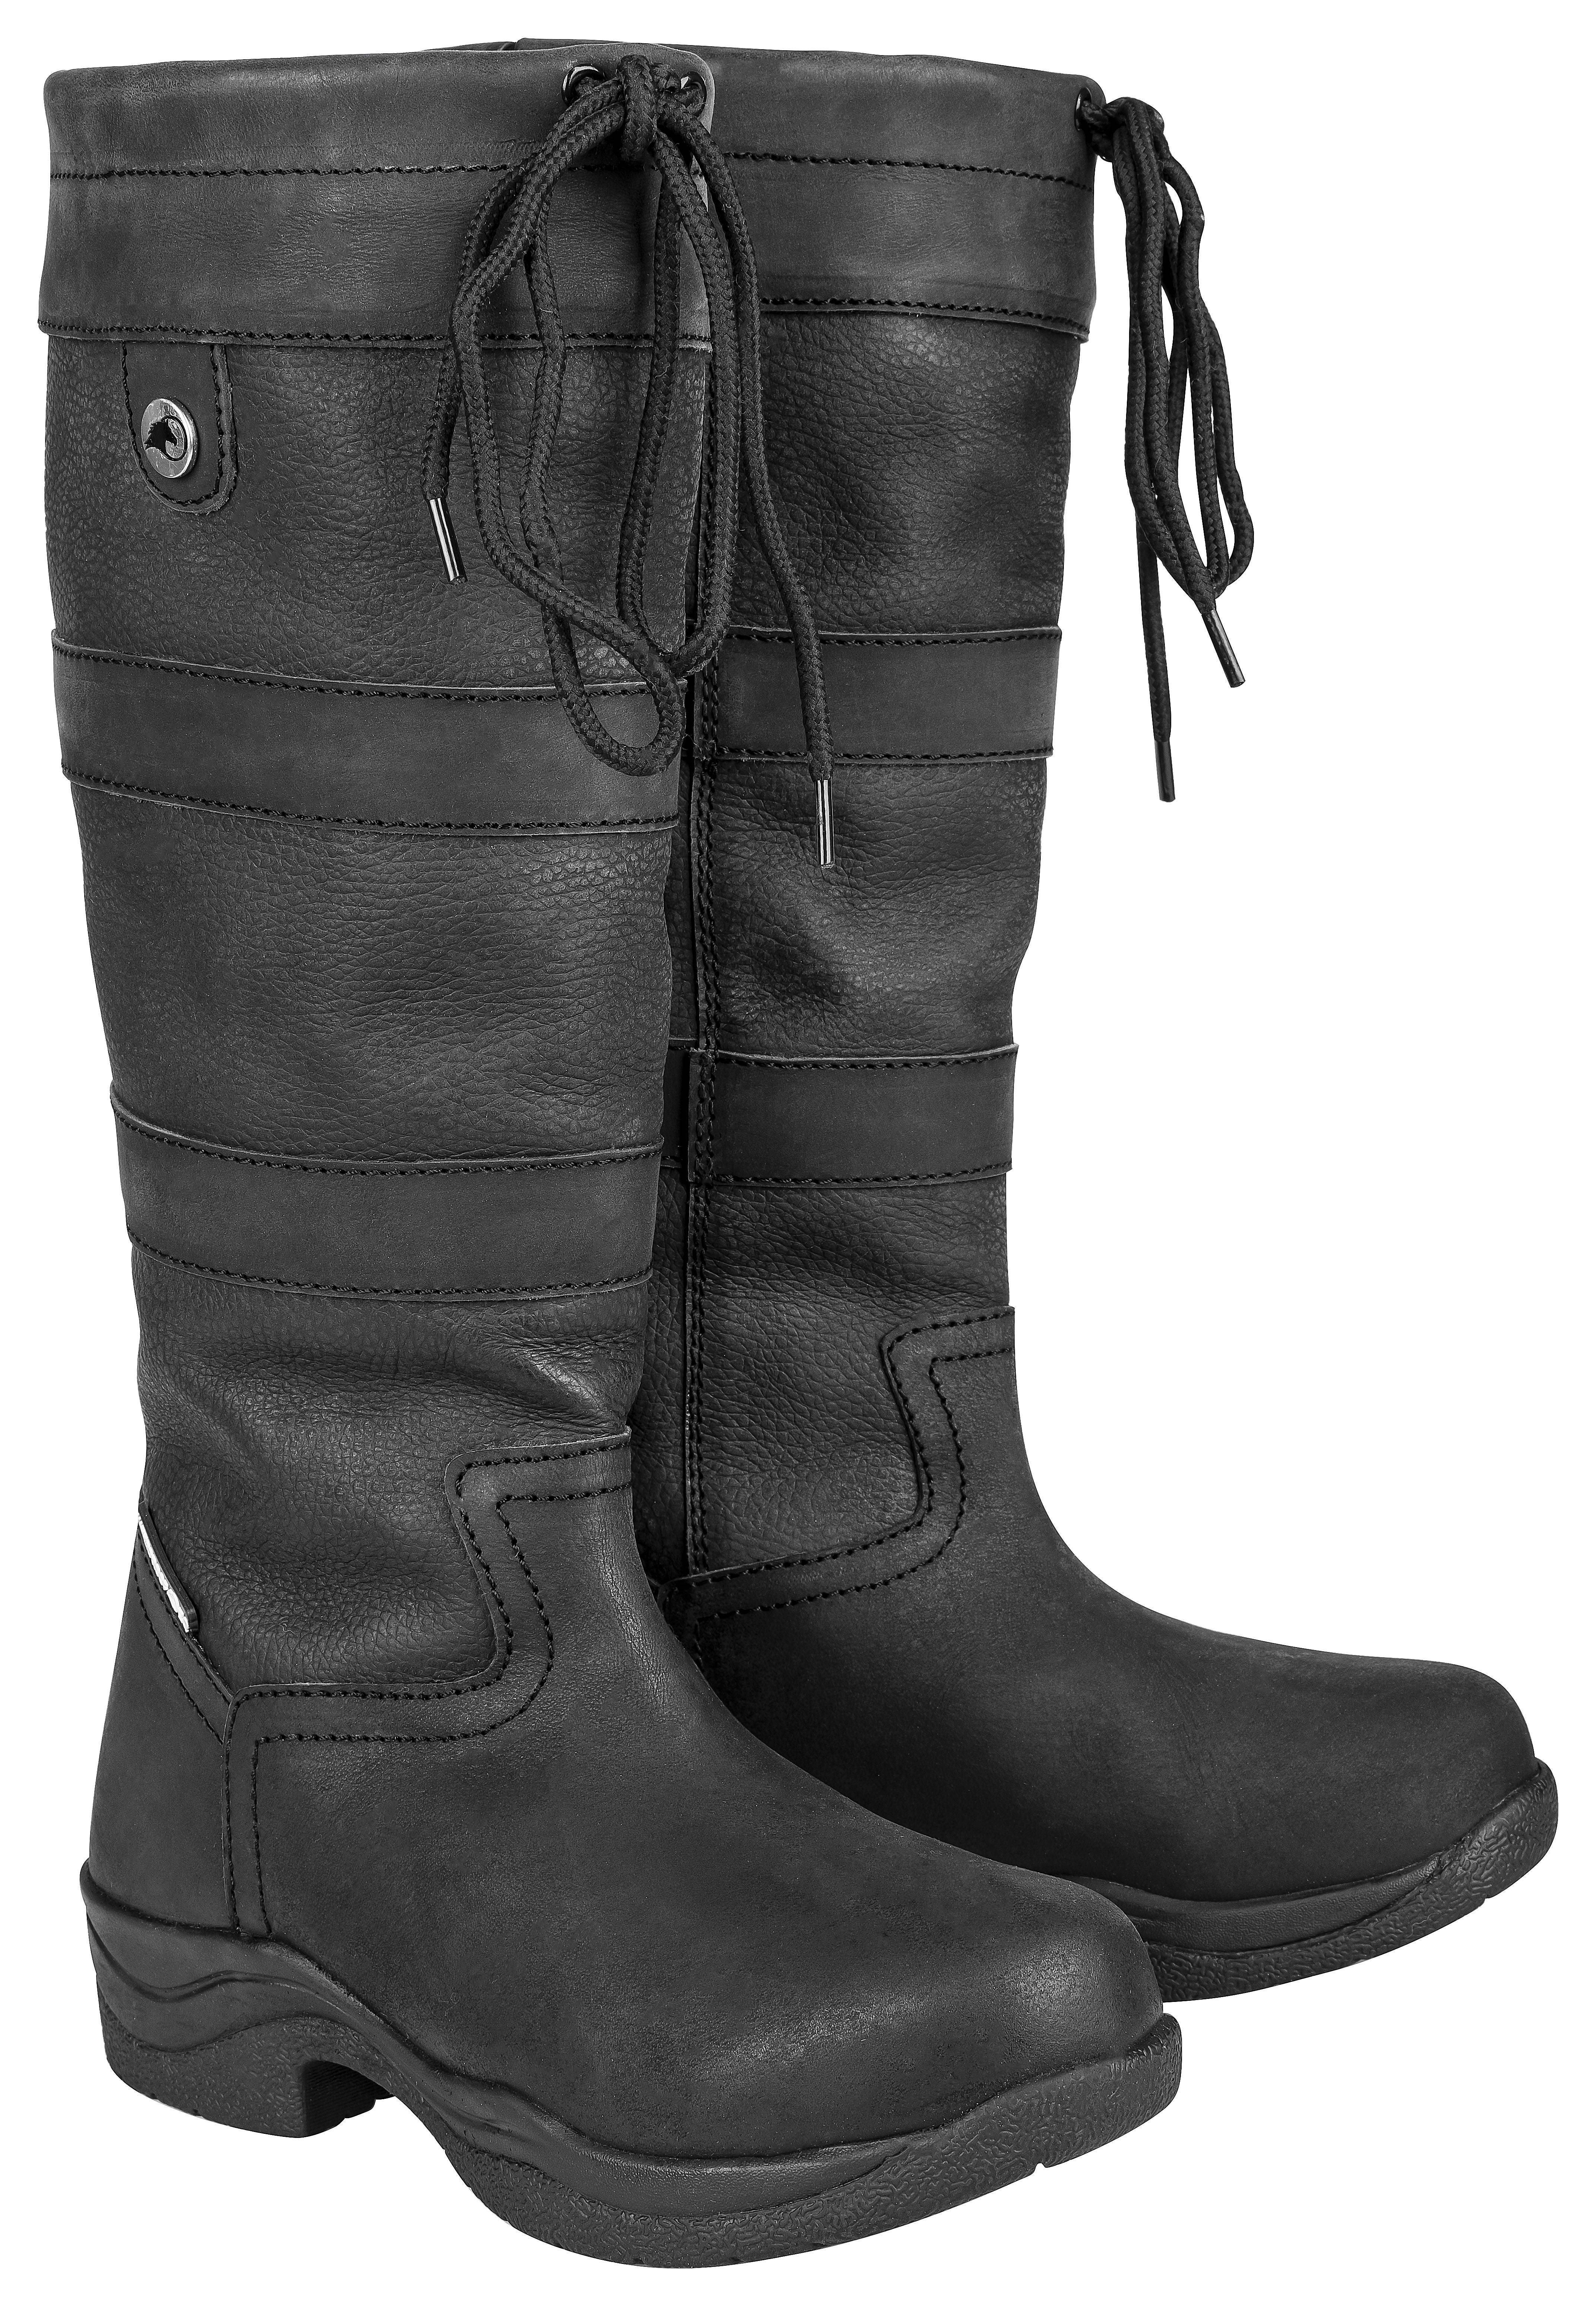 OEQ Brooke Country Boots